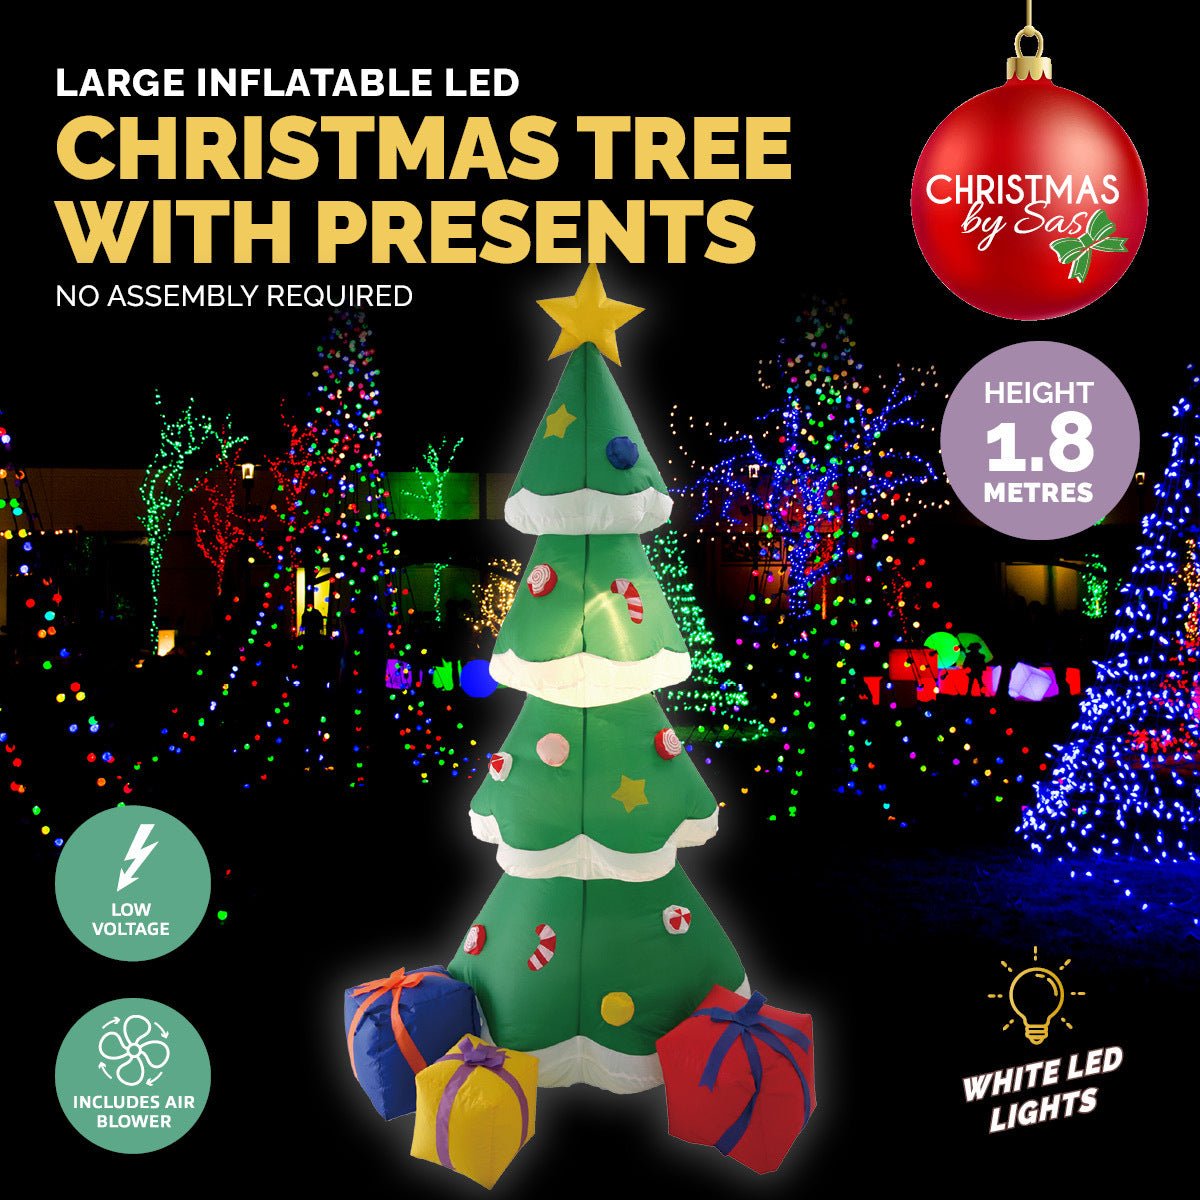 Christmas By Sas 1.8m Self Inflatable LED Tree With Presents - Little Kids Business